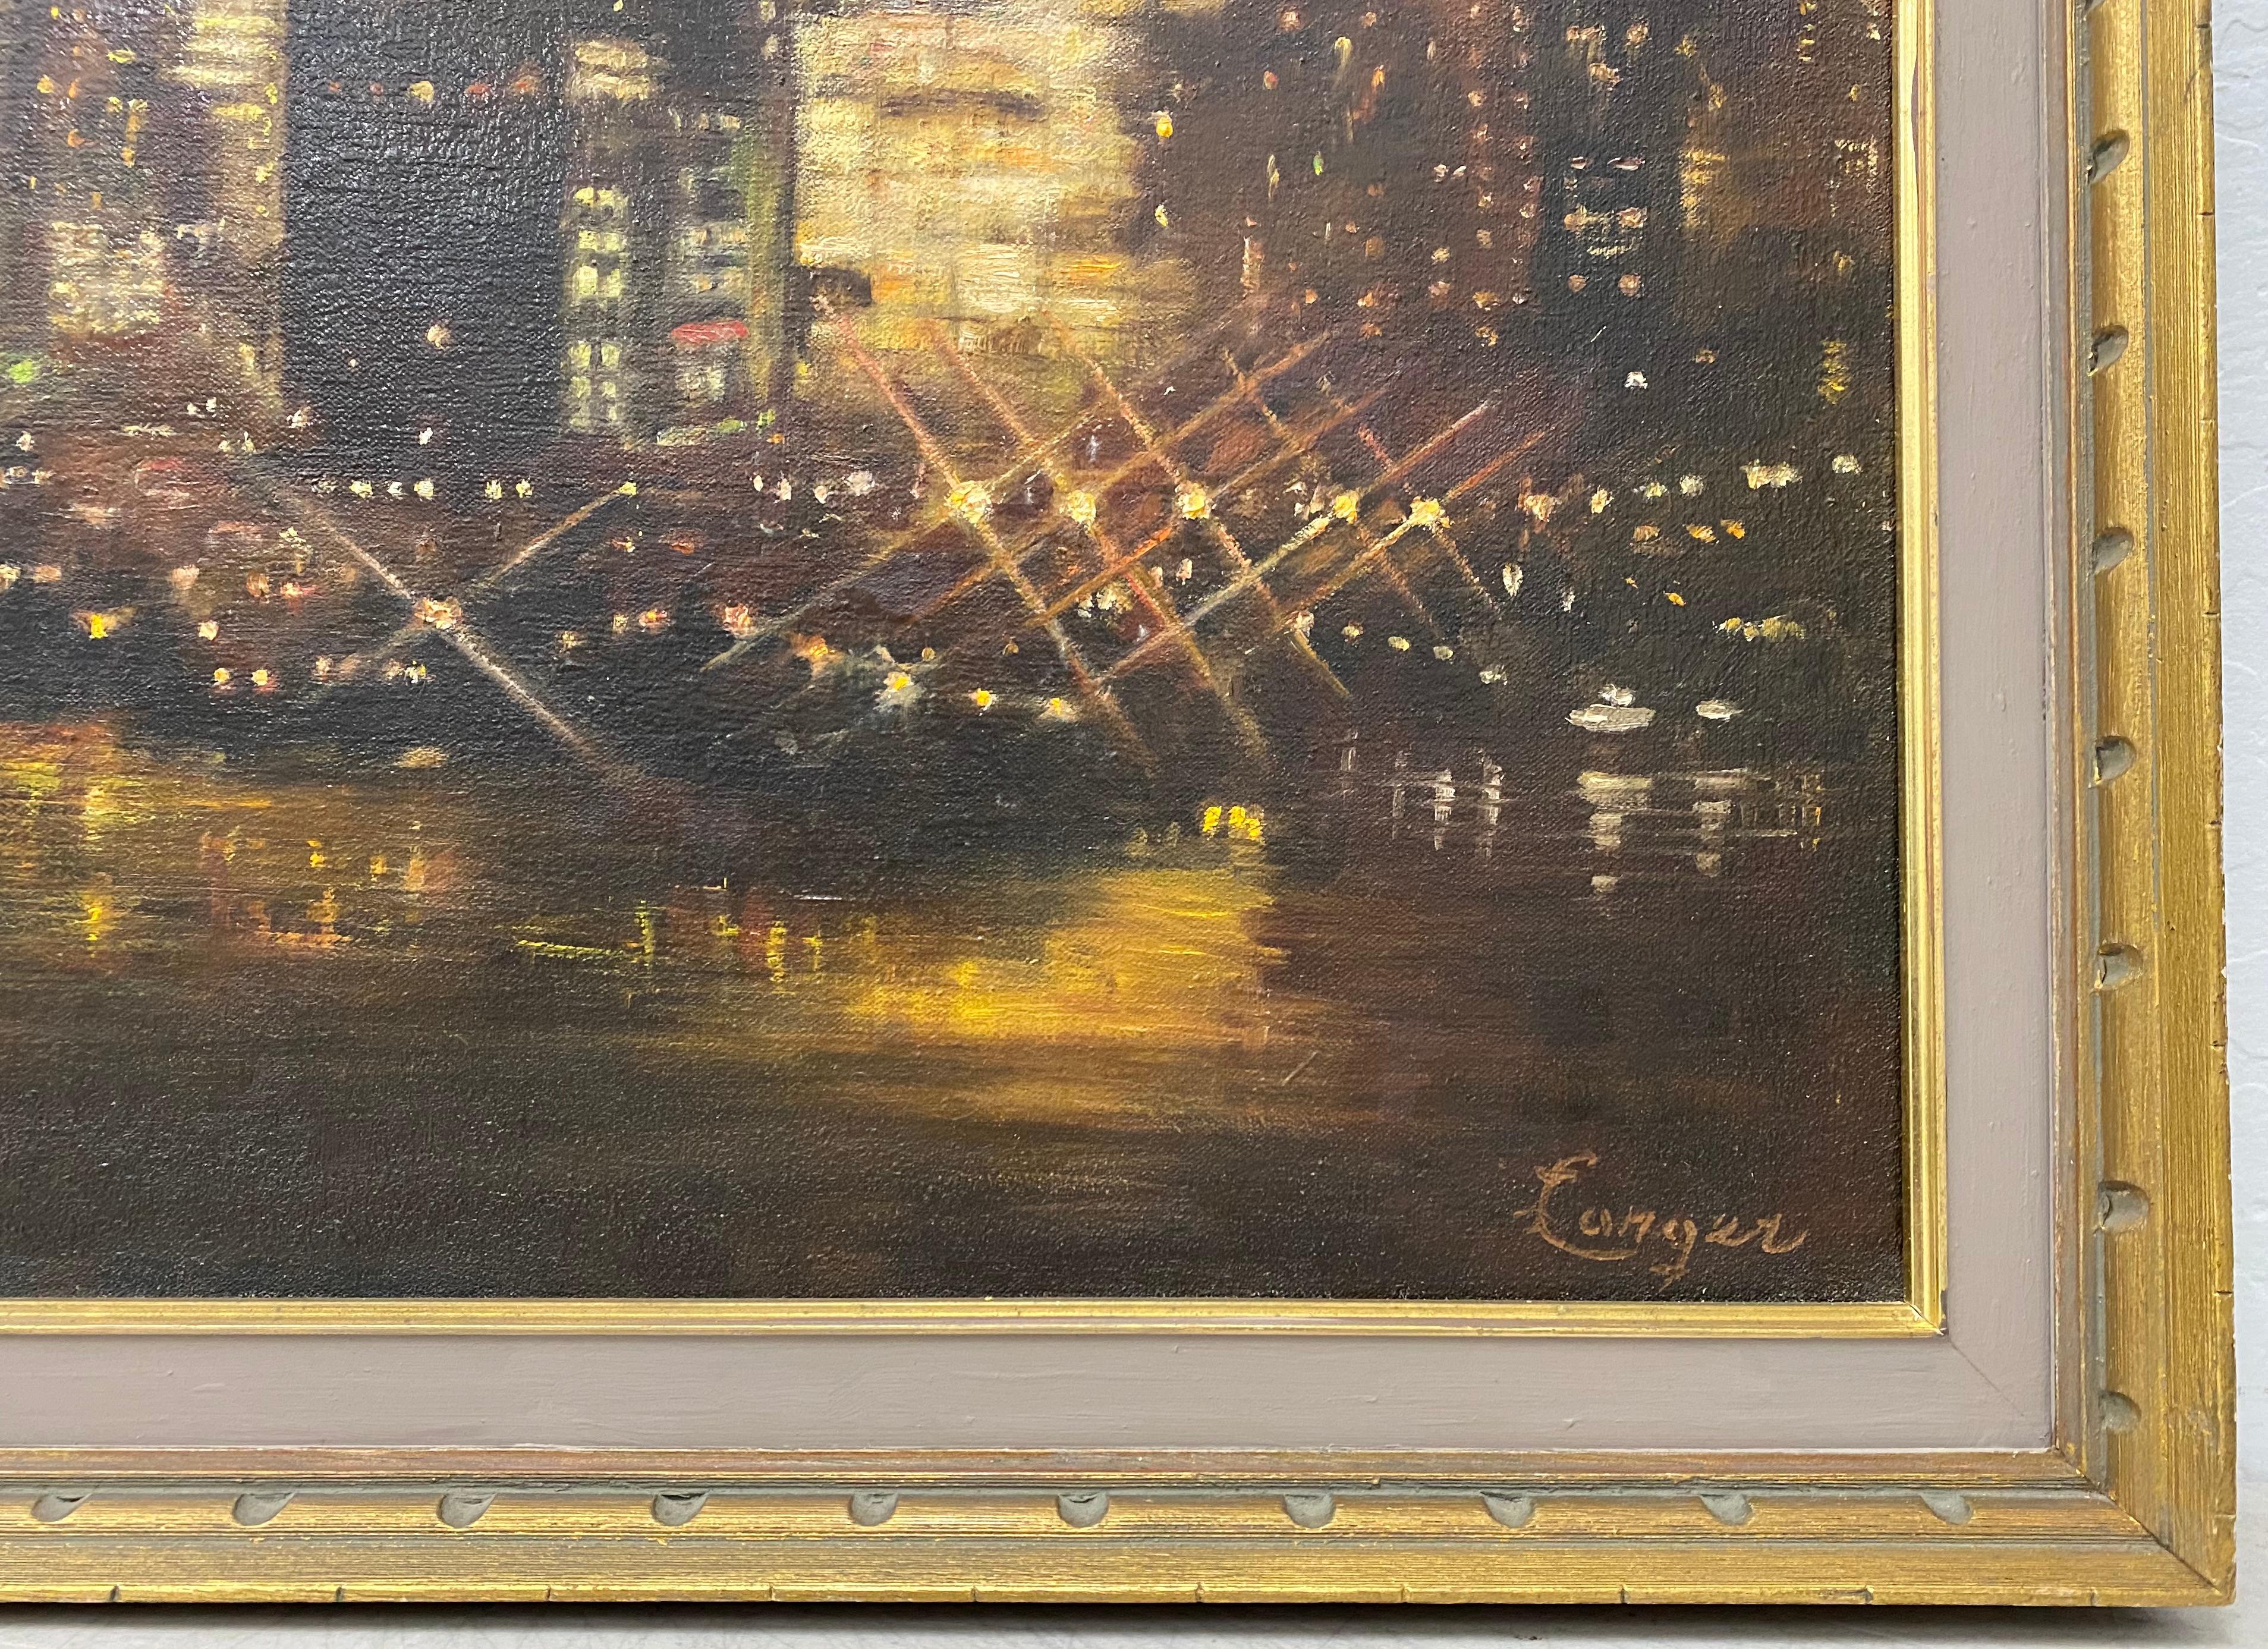 Mid Century San Francisco Skyline at Night Original Oil Painting by Conger c.1950

Original oil on canvas

Dimensions 40